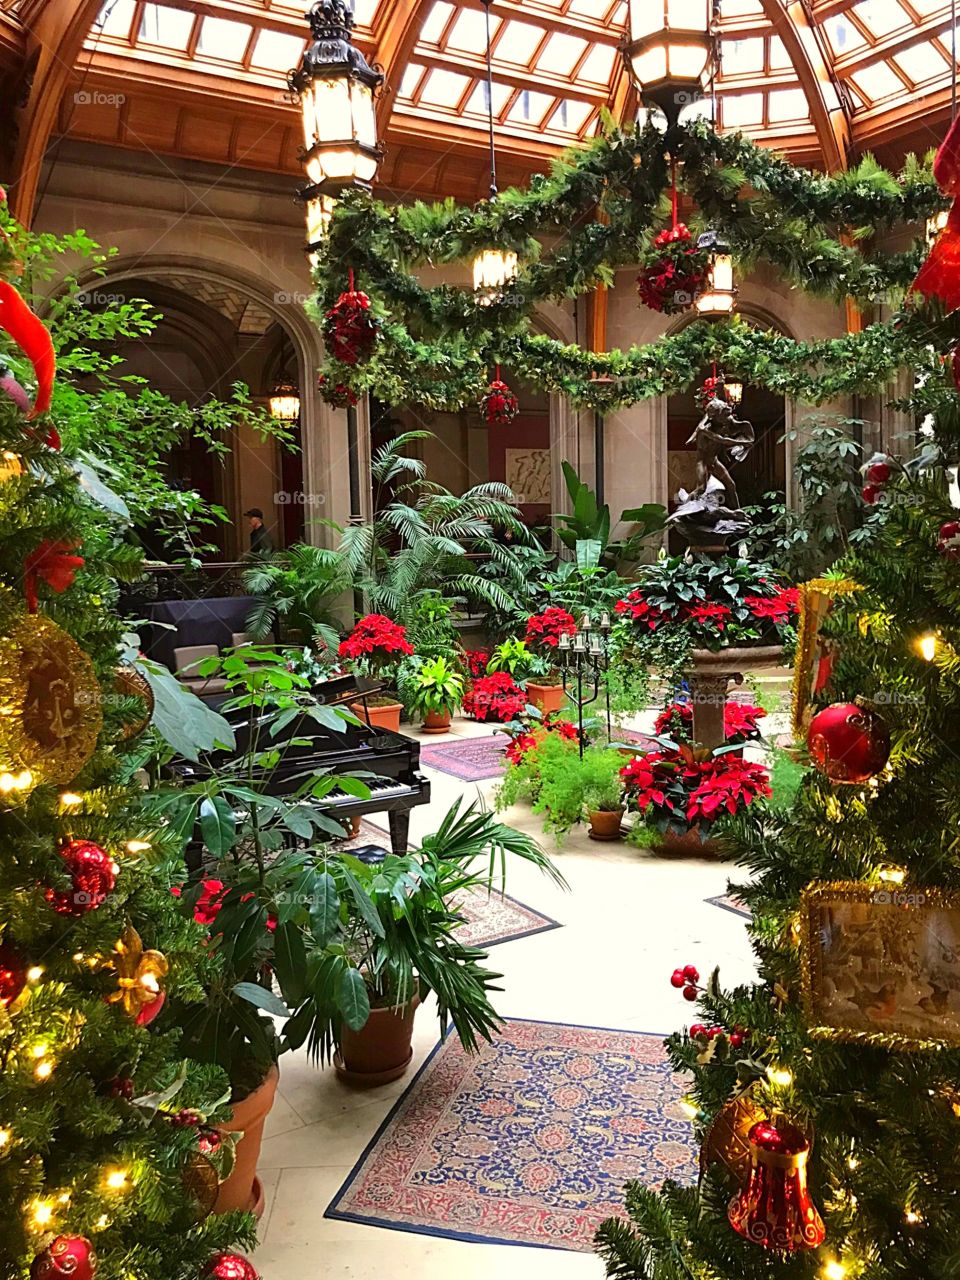 Arboretum decorated with festive wreaths, greenery, poinsettias, and Christmas trees, grand piano, architecture, Sunroof